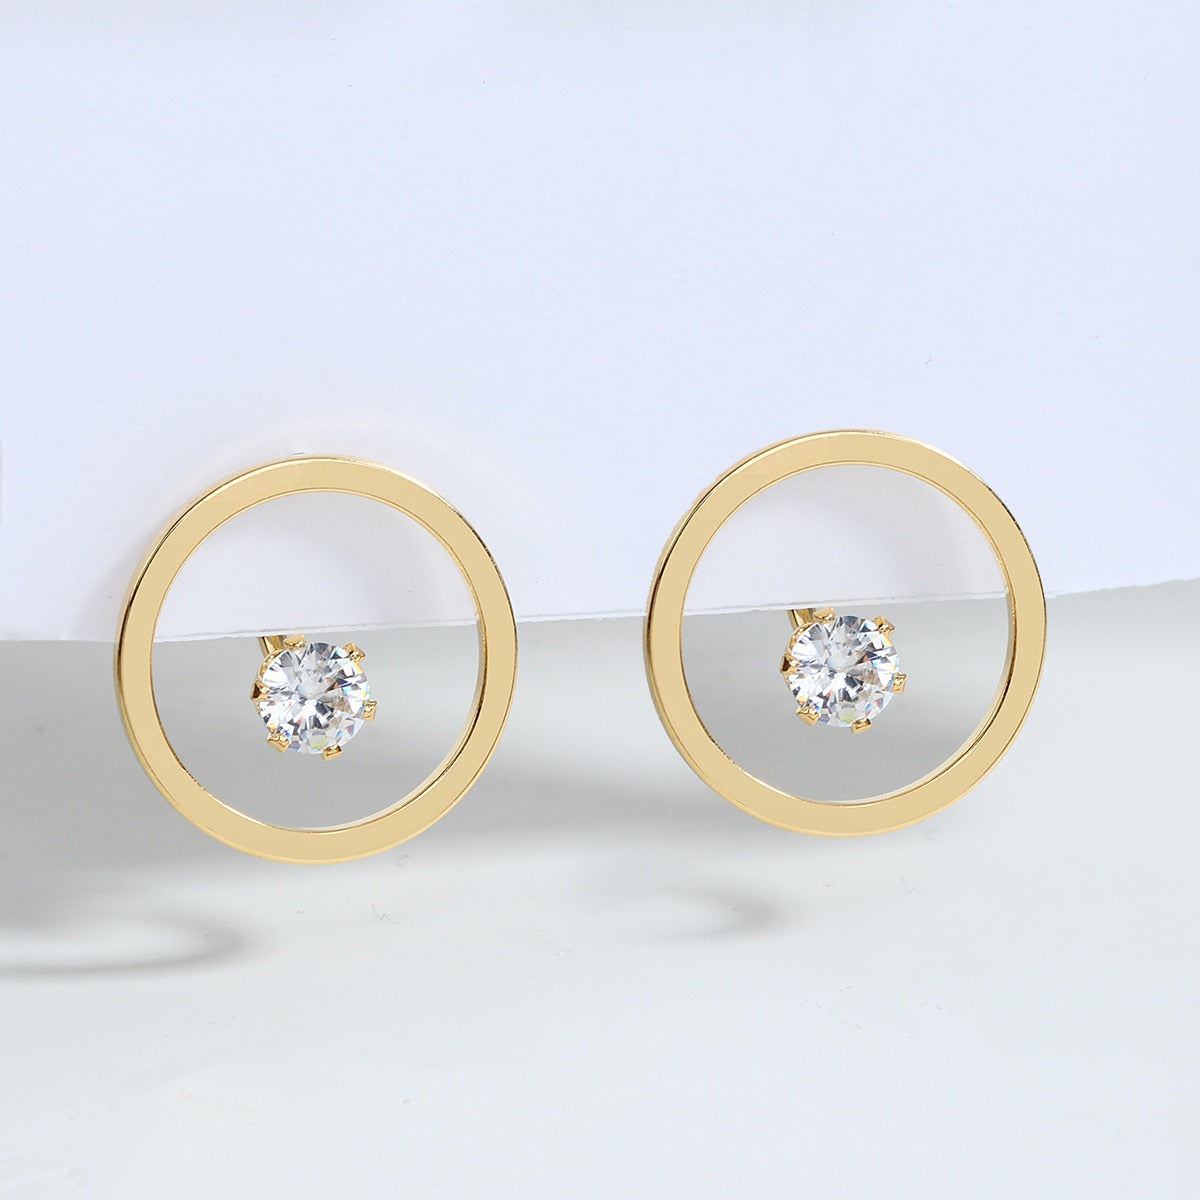 Maytrends Trendy Minimalist French Round Circle Crystal Drop Earrings for Women Simple Temperament Gold Color Earring Jewelry